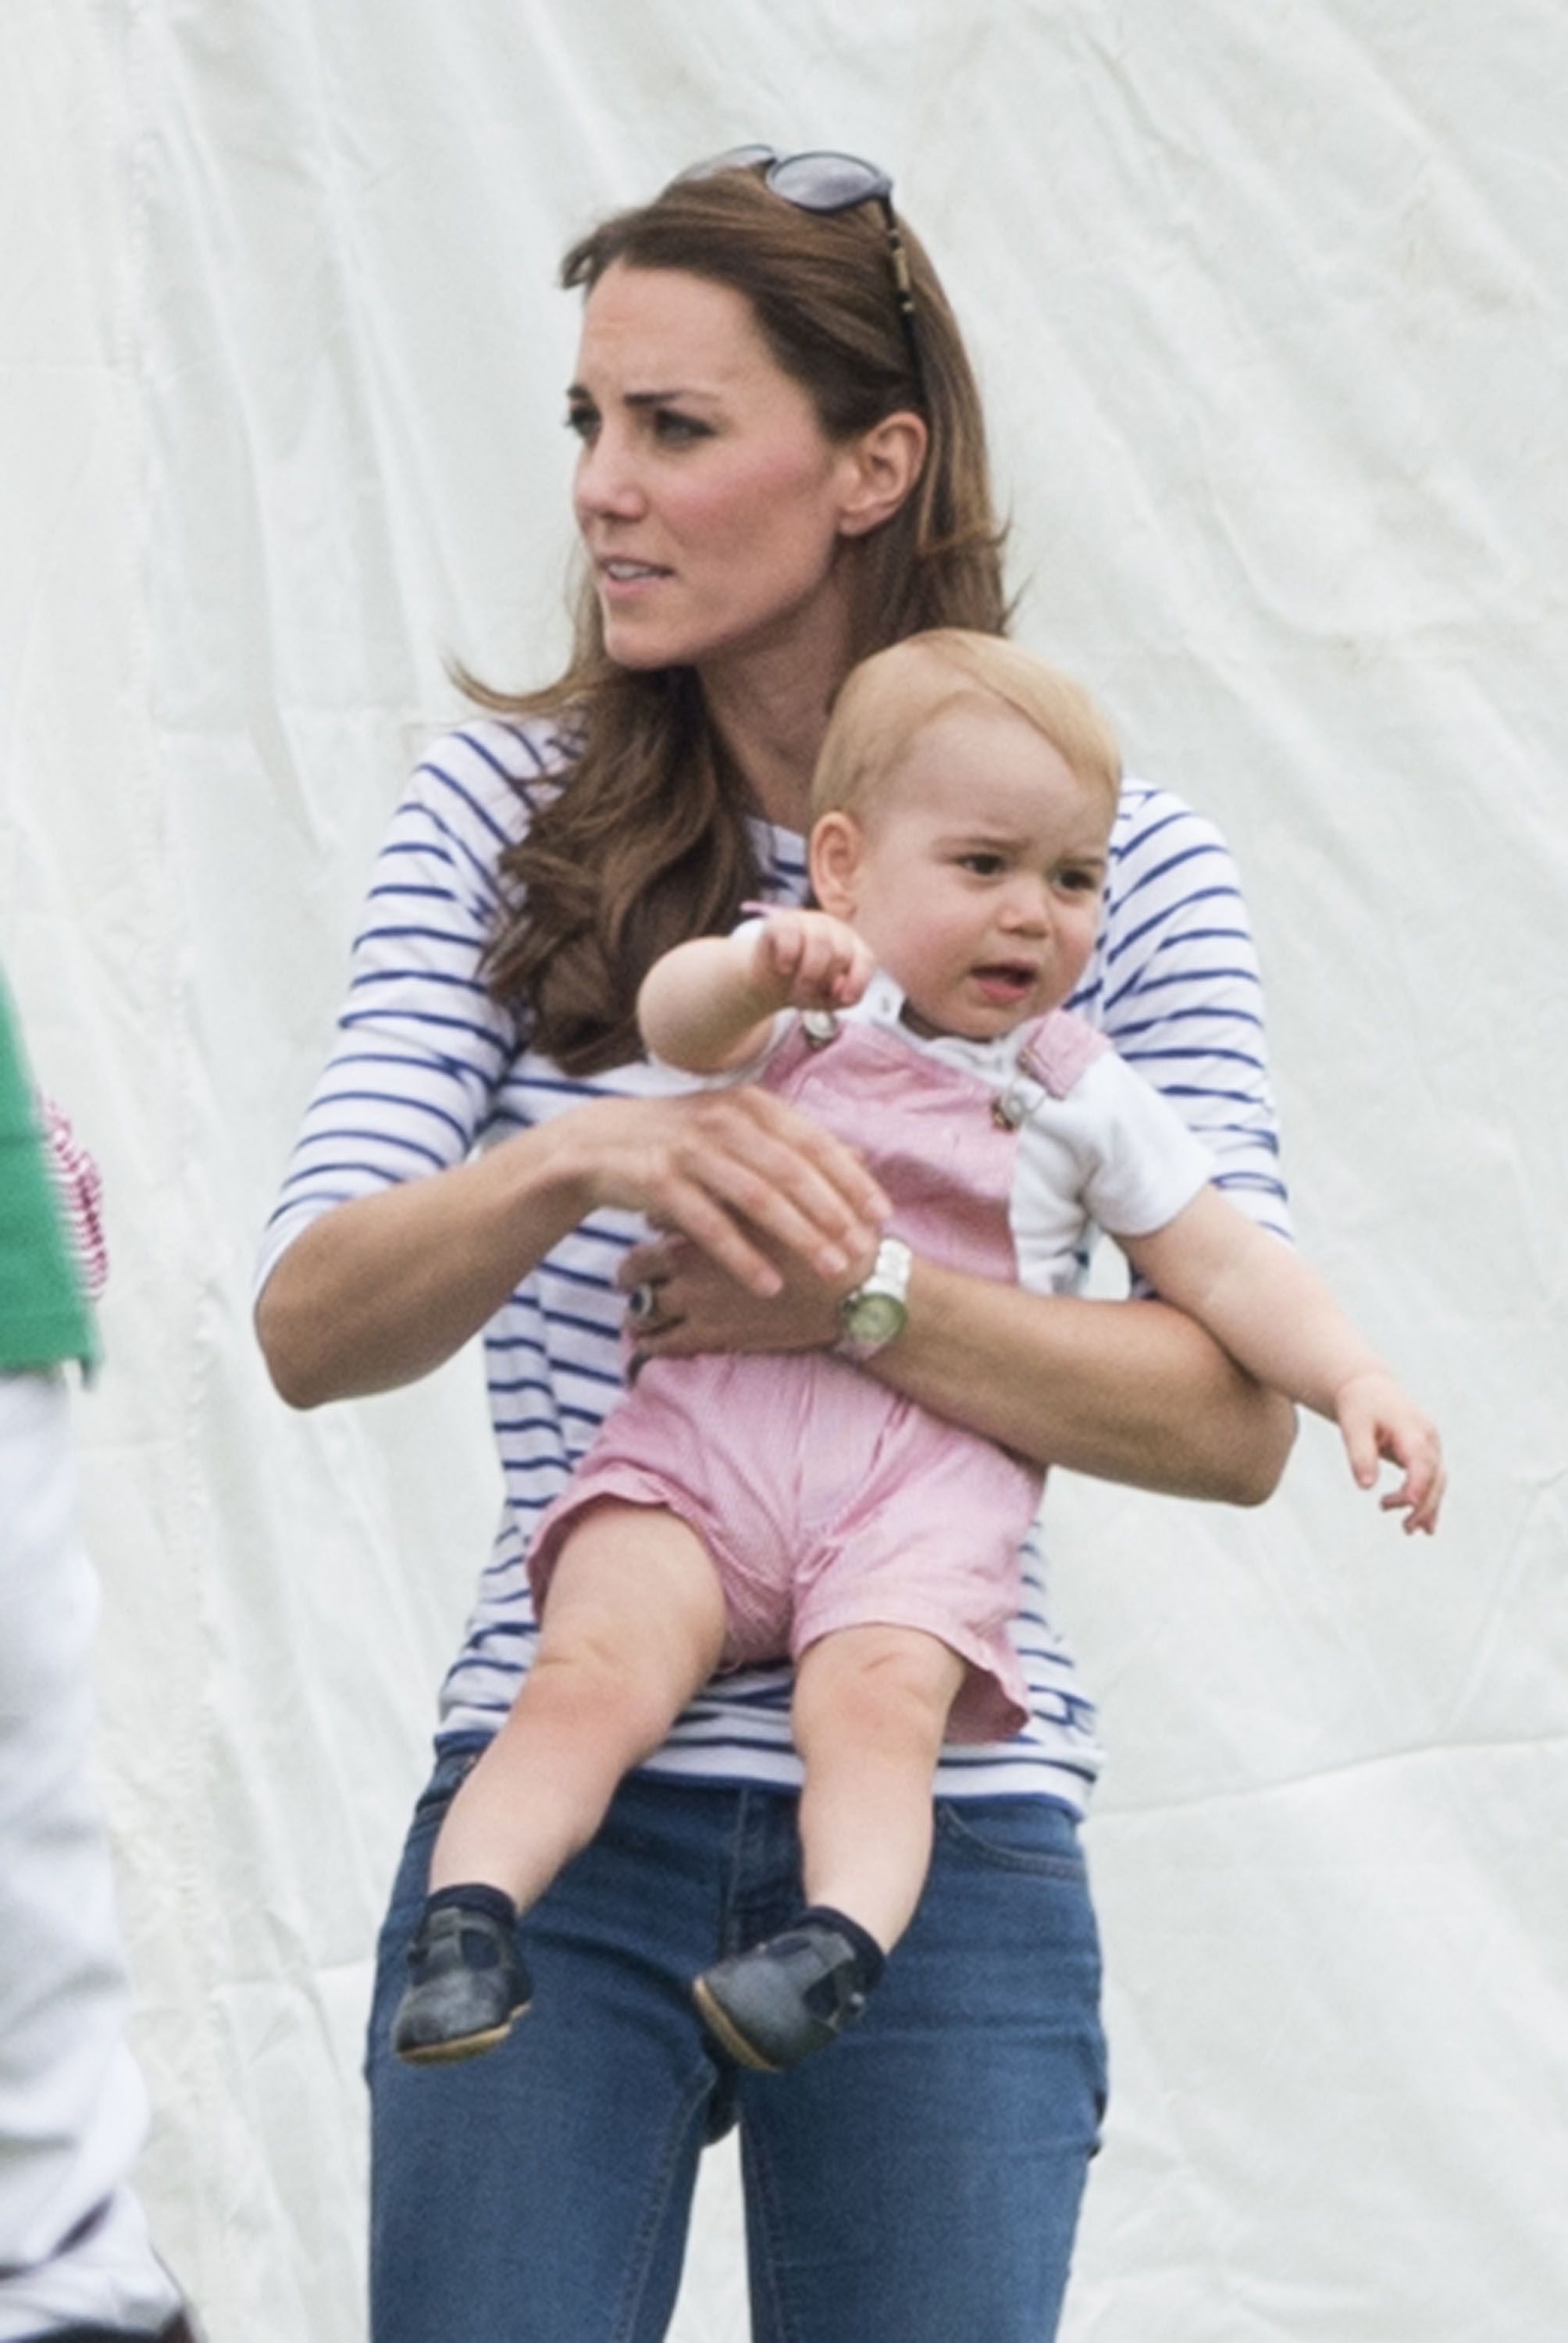 15 Photos of the Royal Kids in Fashionable Outfits - Royal